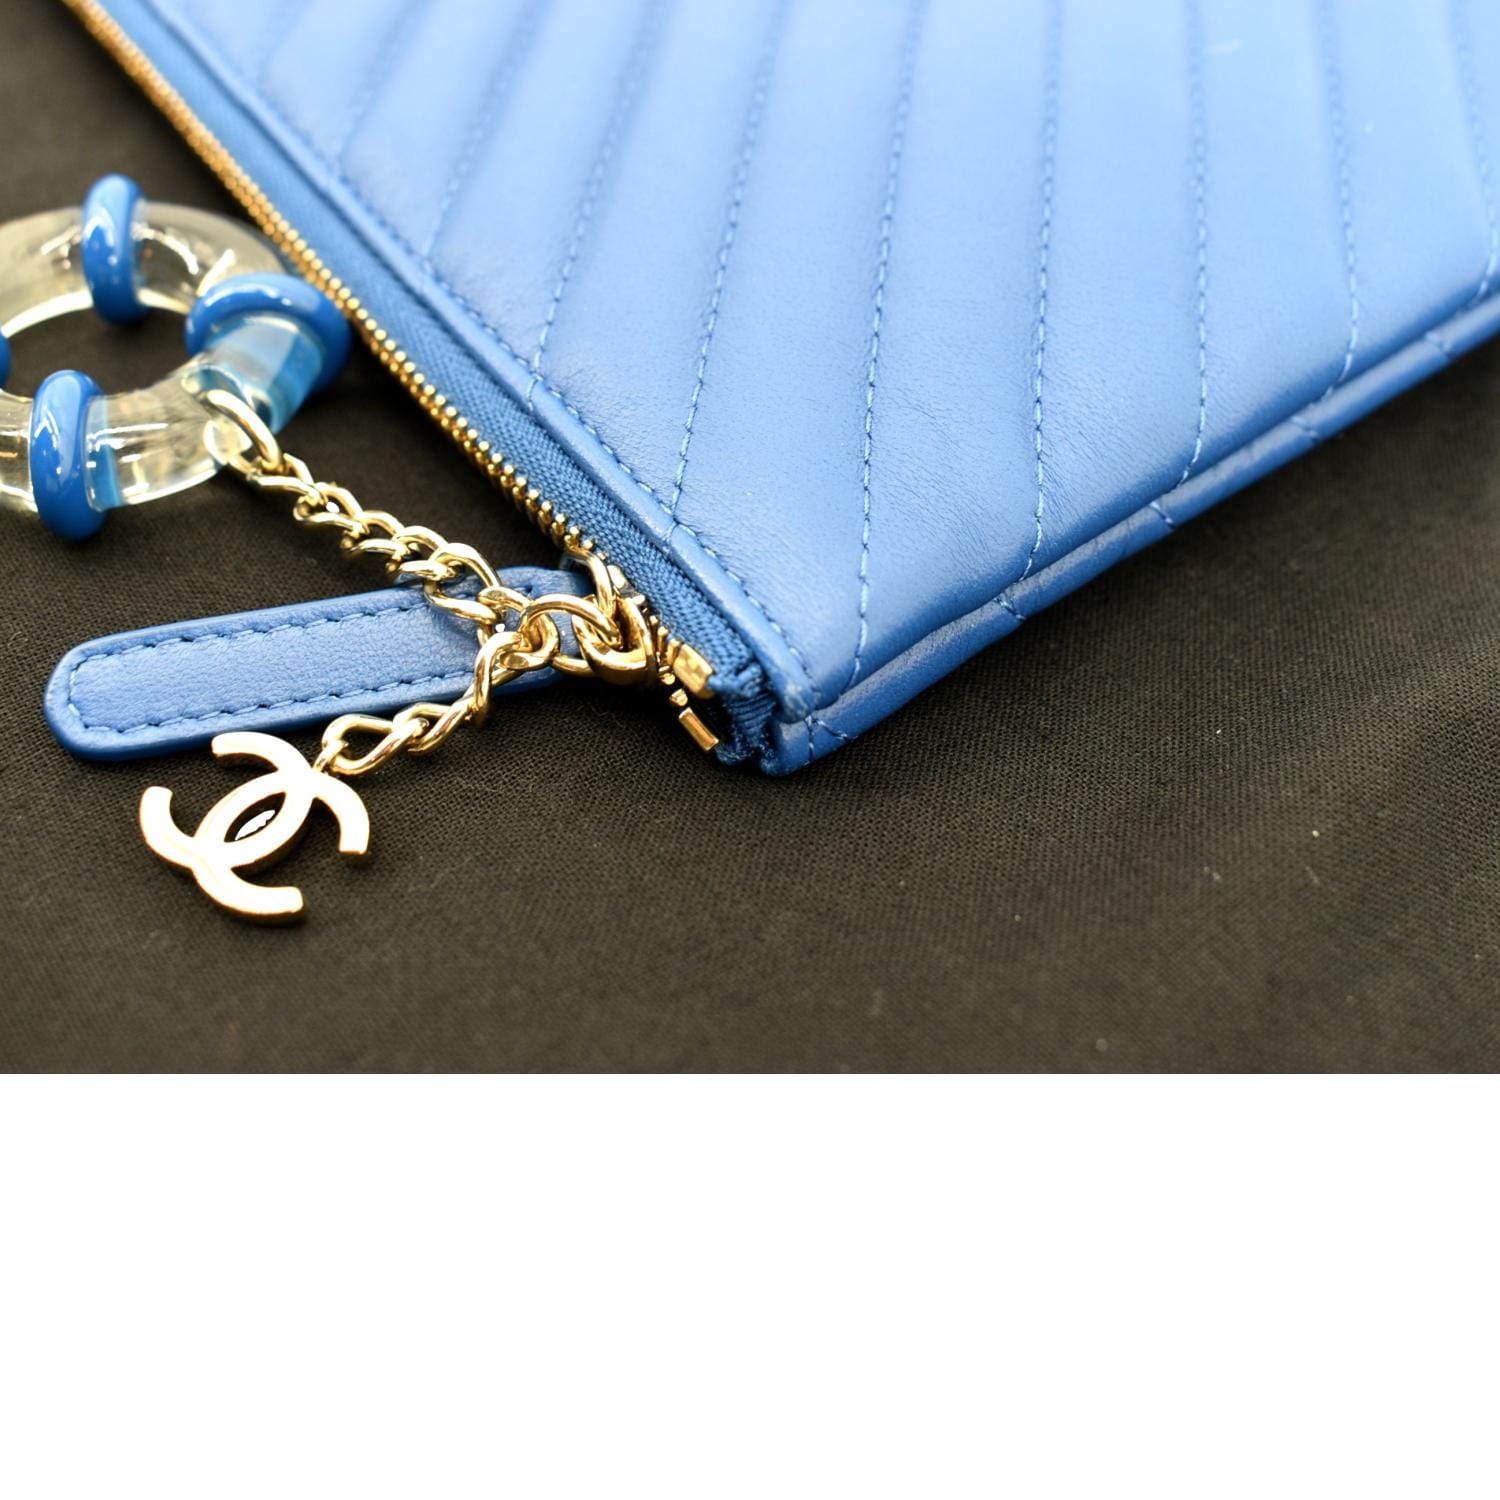 Replica Chanel Sequins 19 Clutch With Chain AP0945 Sky Blue